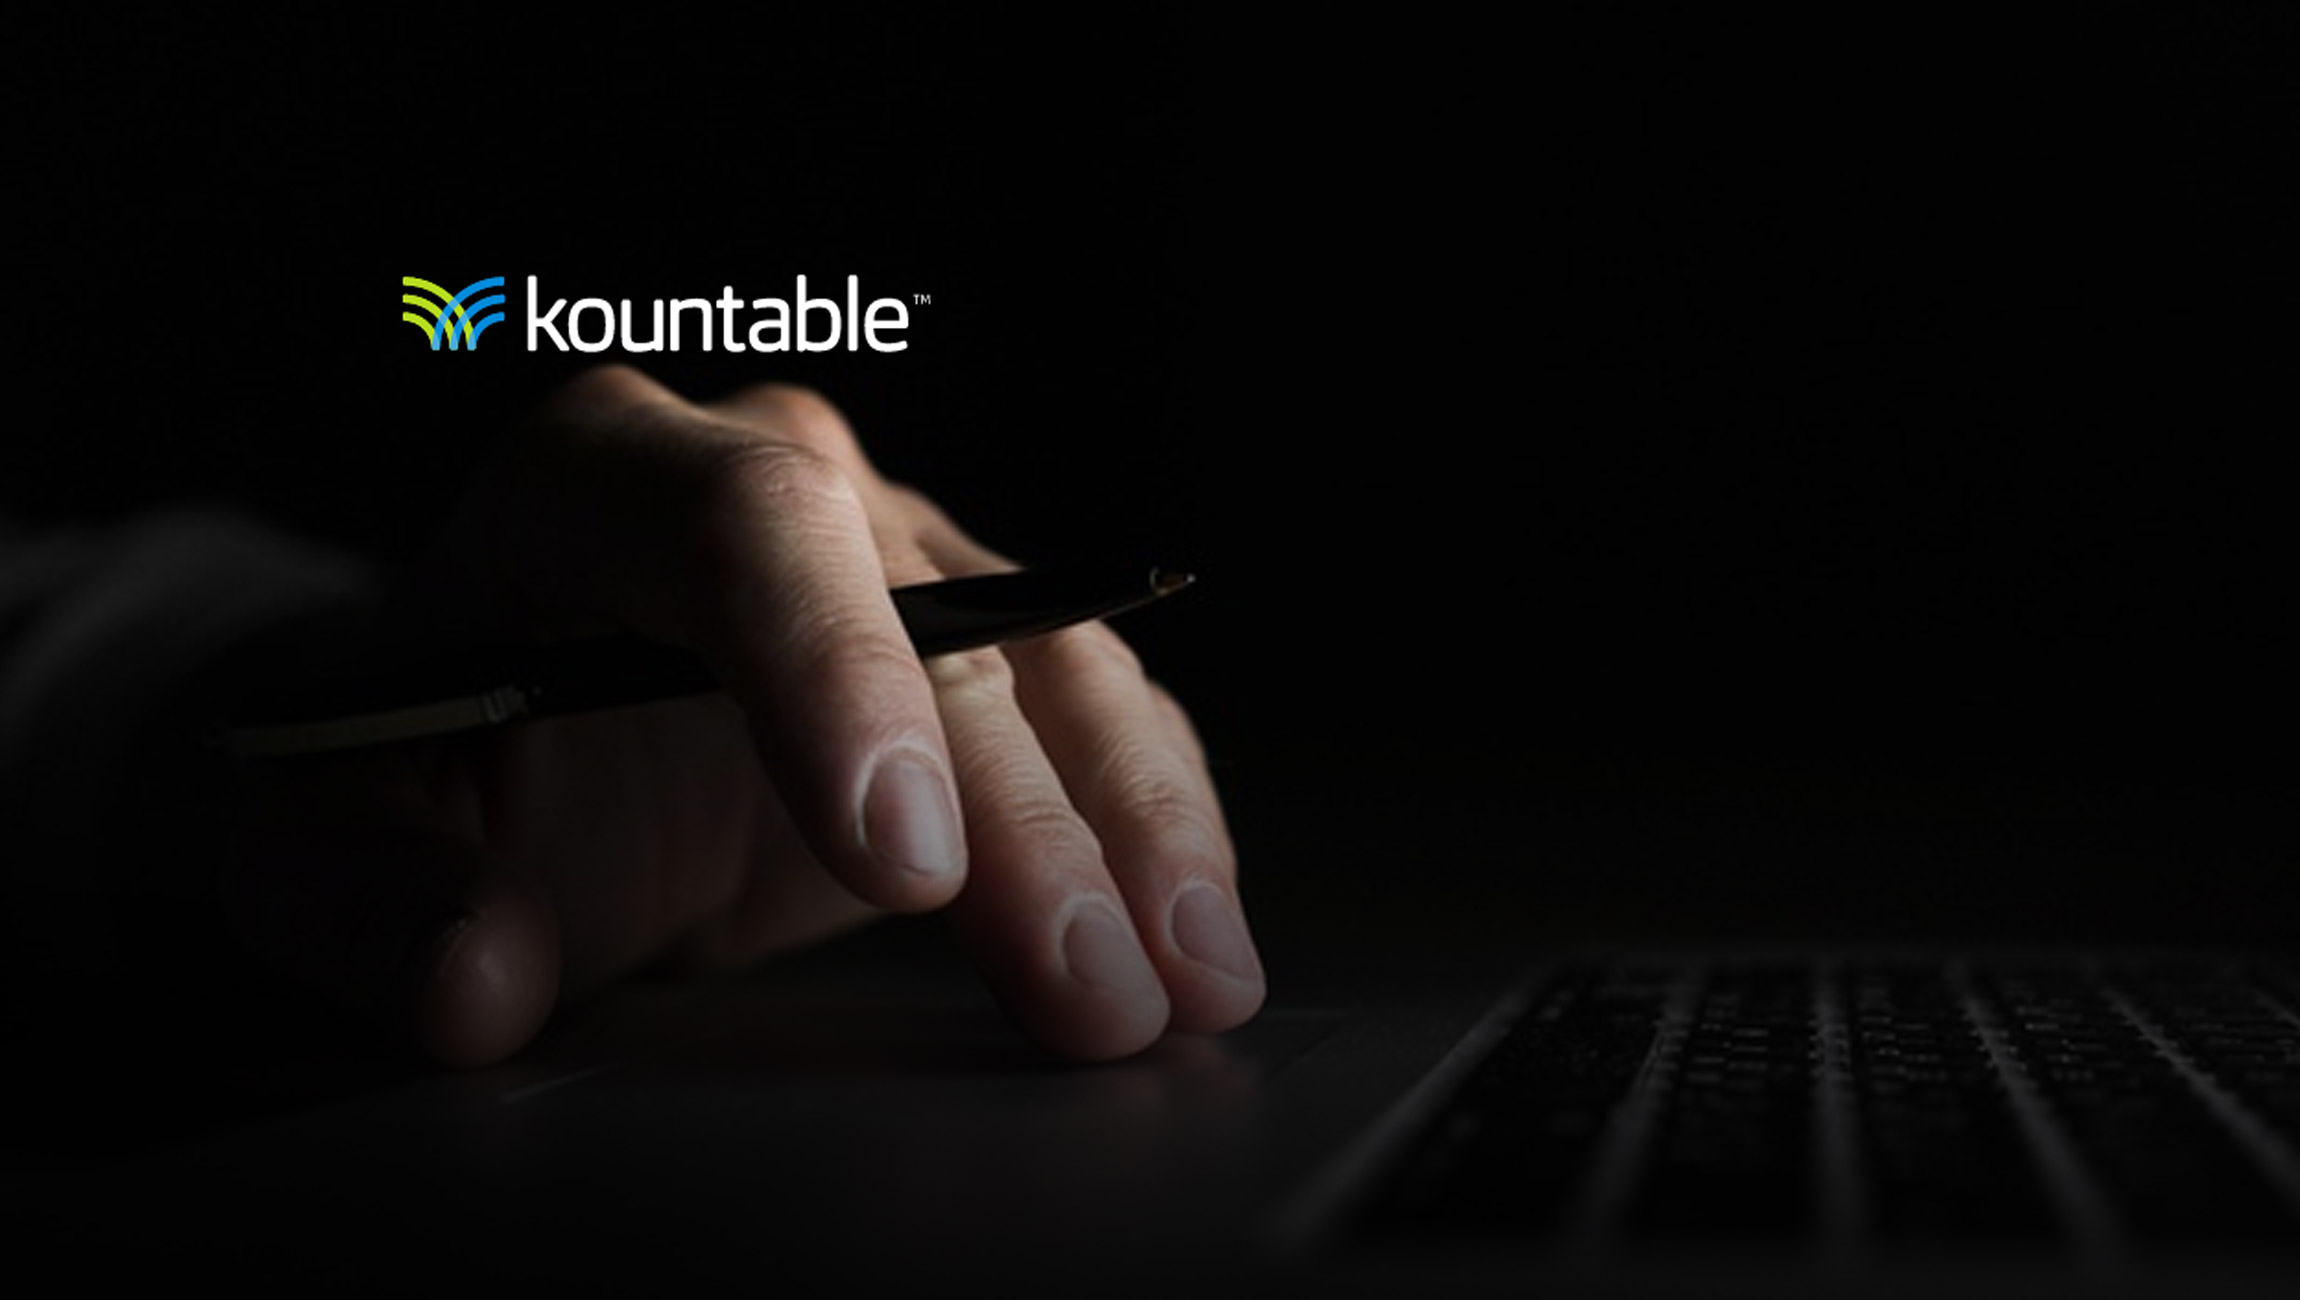 Kountable Secures Funding in Series A-1 Led by Lateral Capital to Launch U.S. Membership and Scale COVID Response